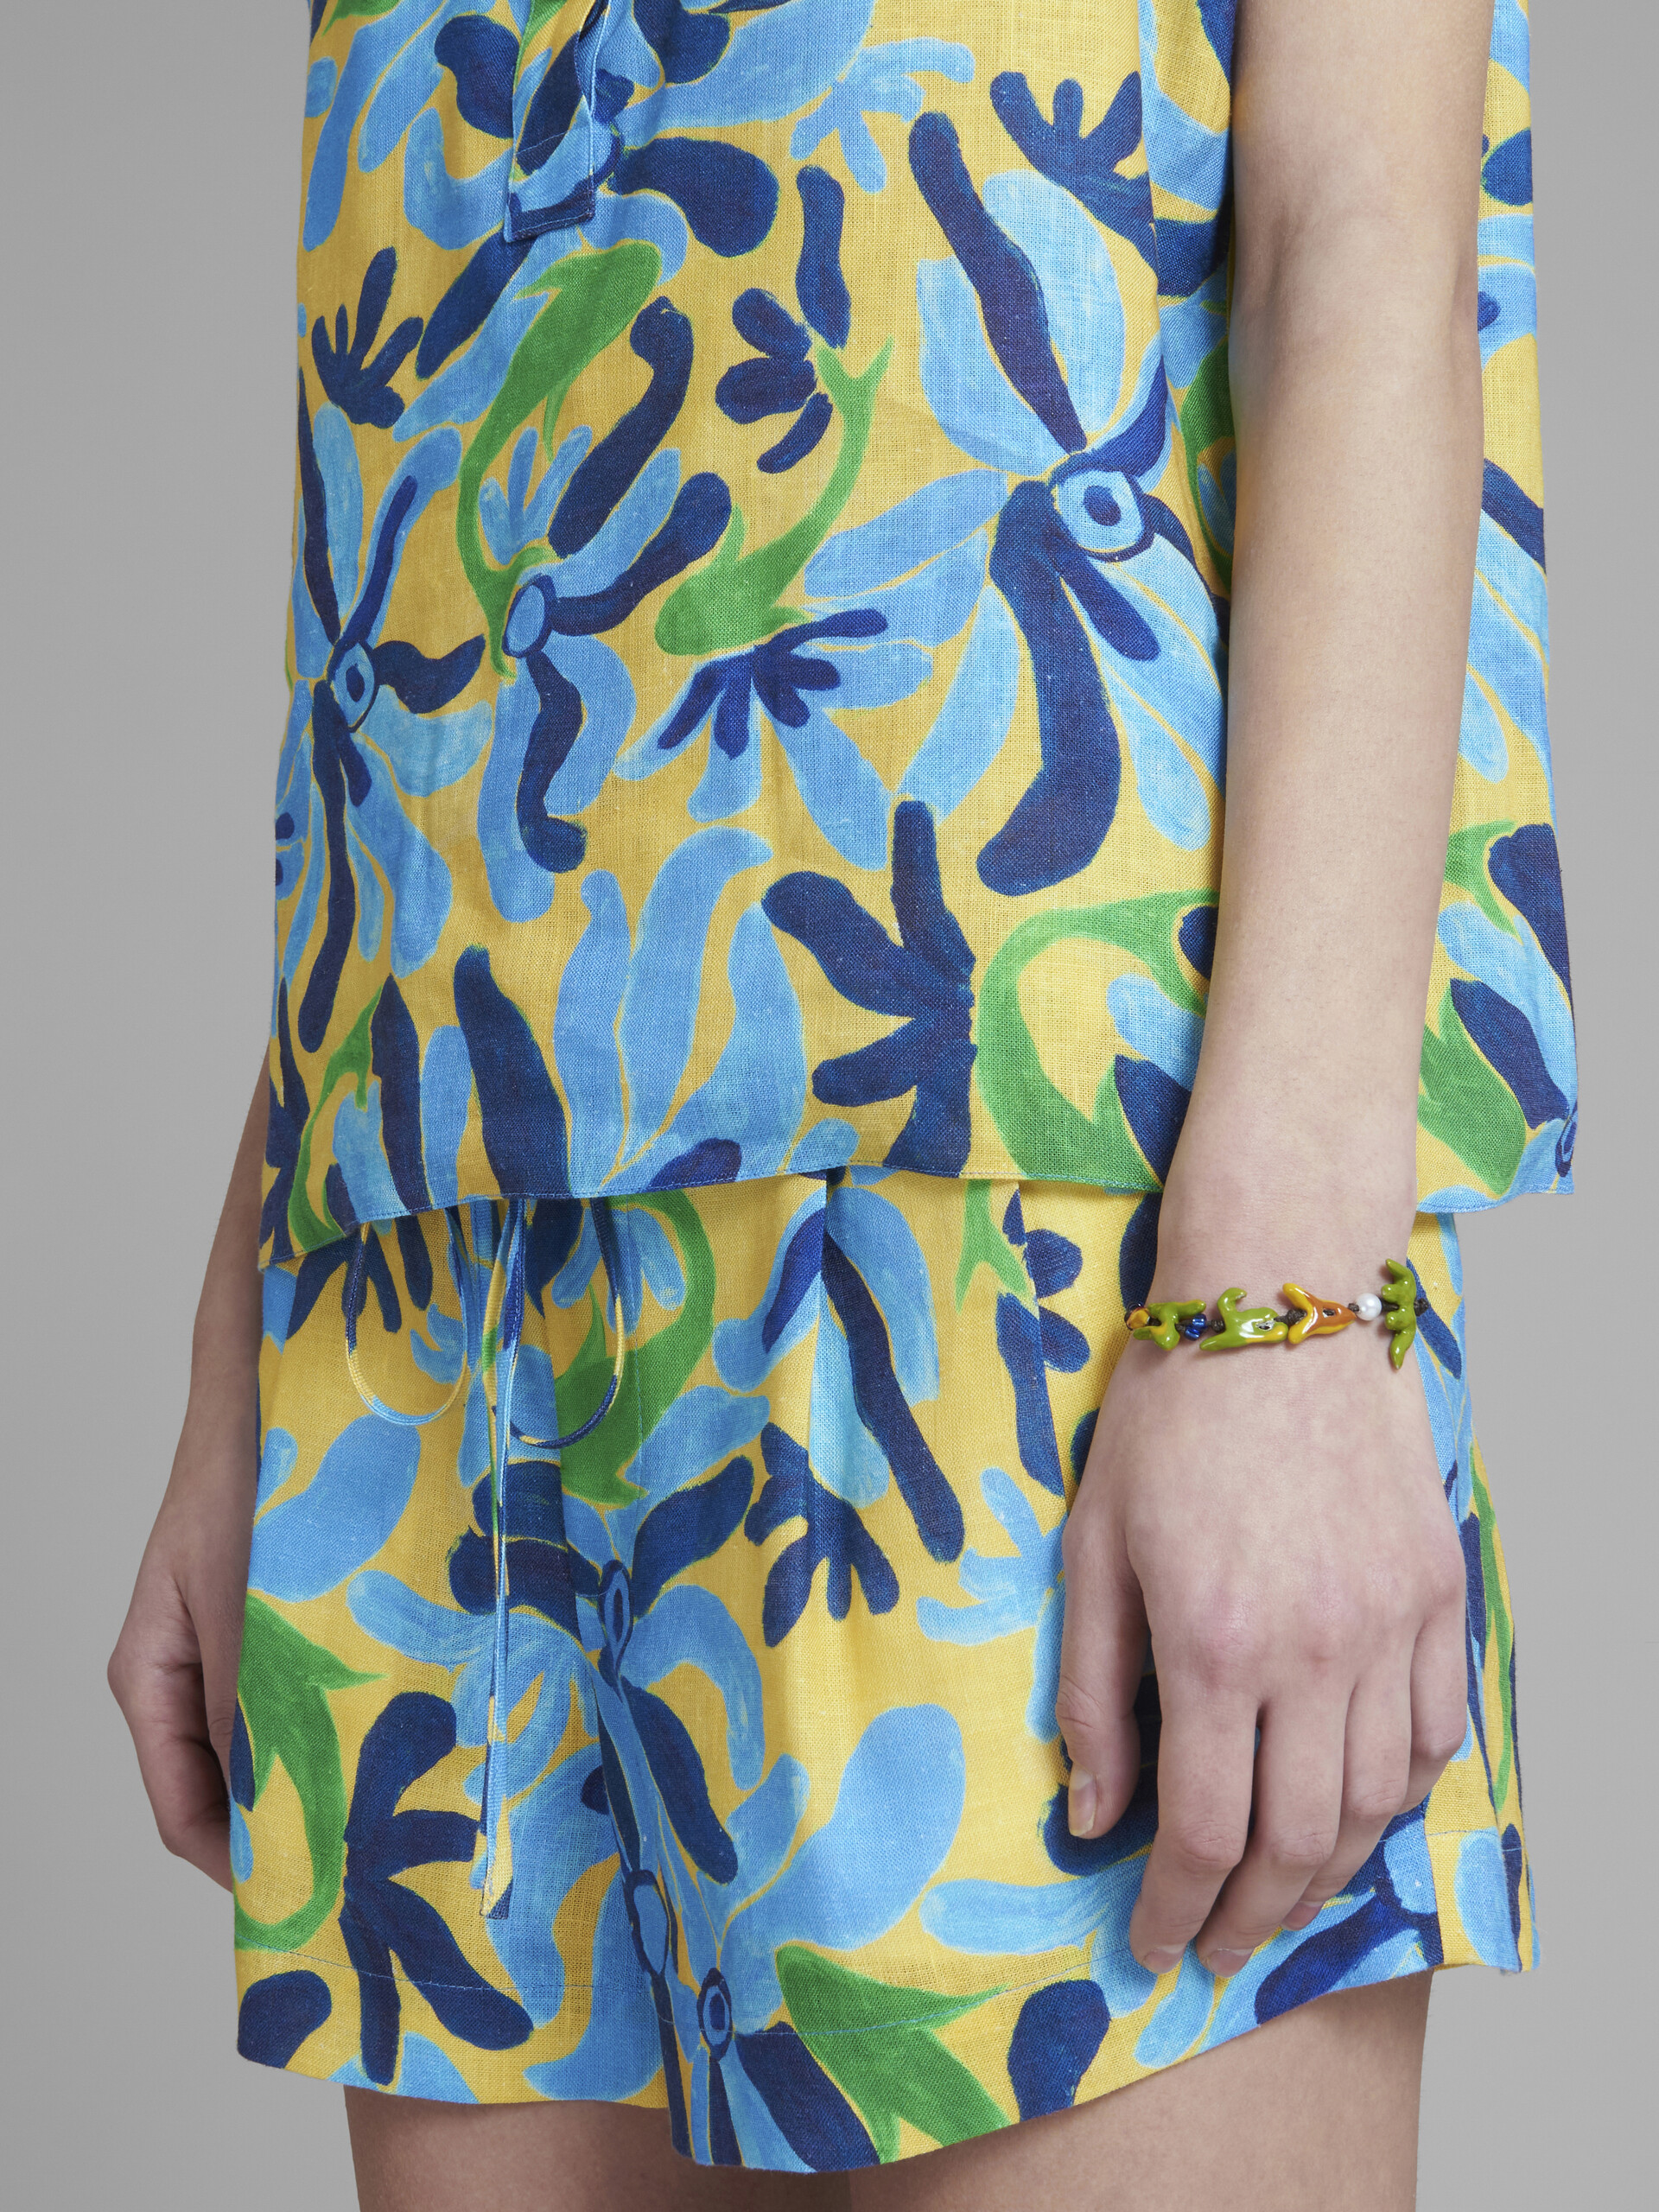 Marni x No Vacancy Inn - Bracelet with green red and yellow pendants - Bracelets - Image 4